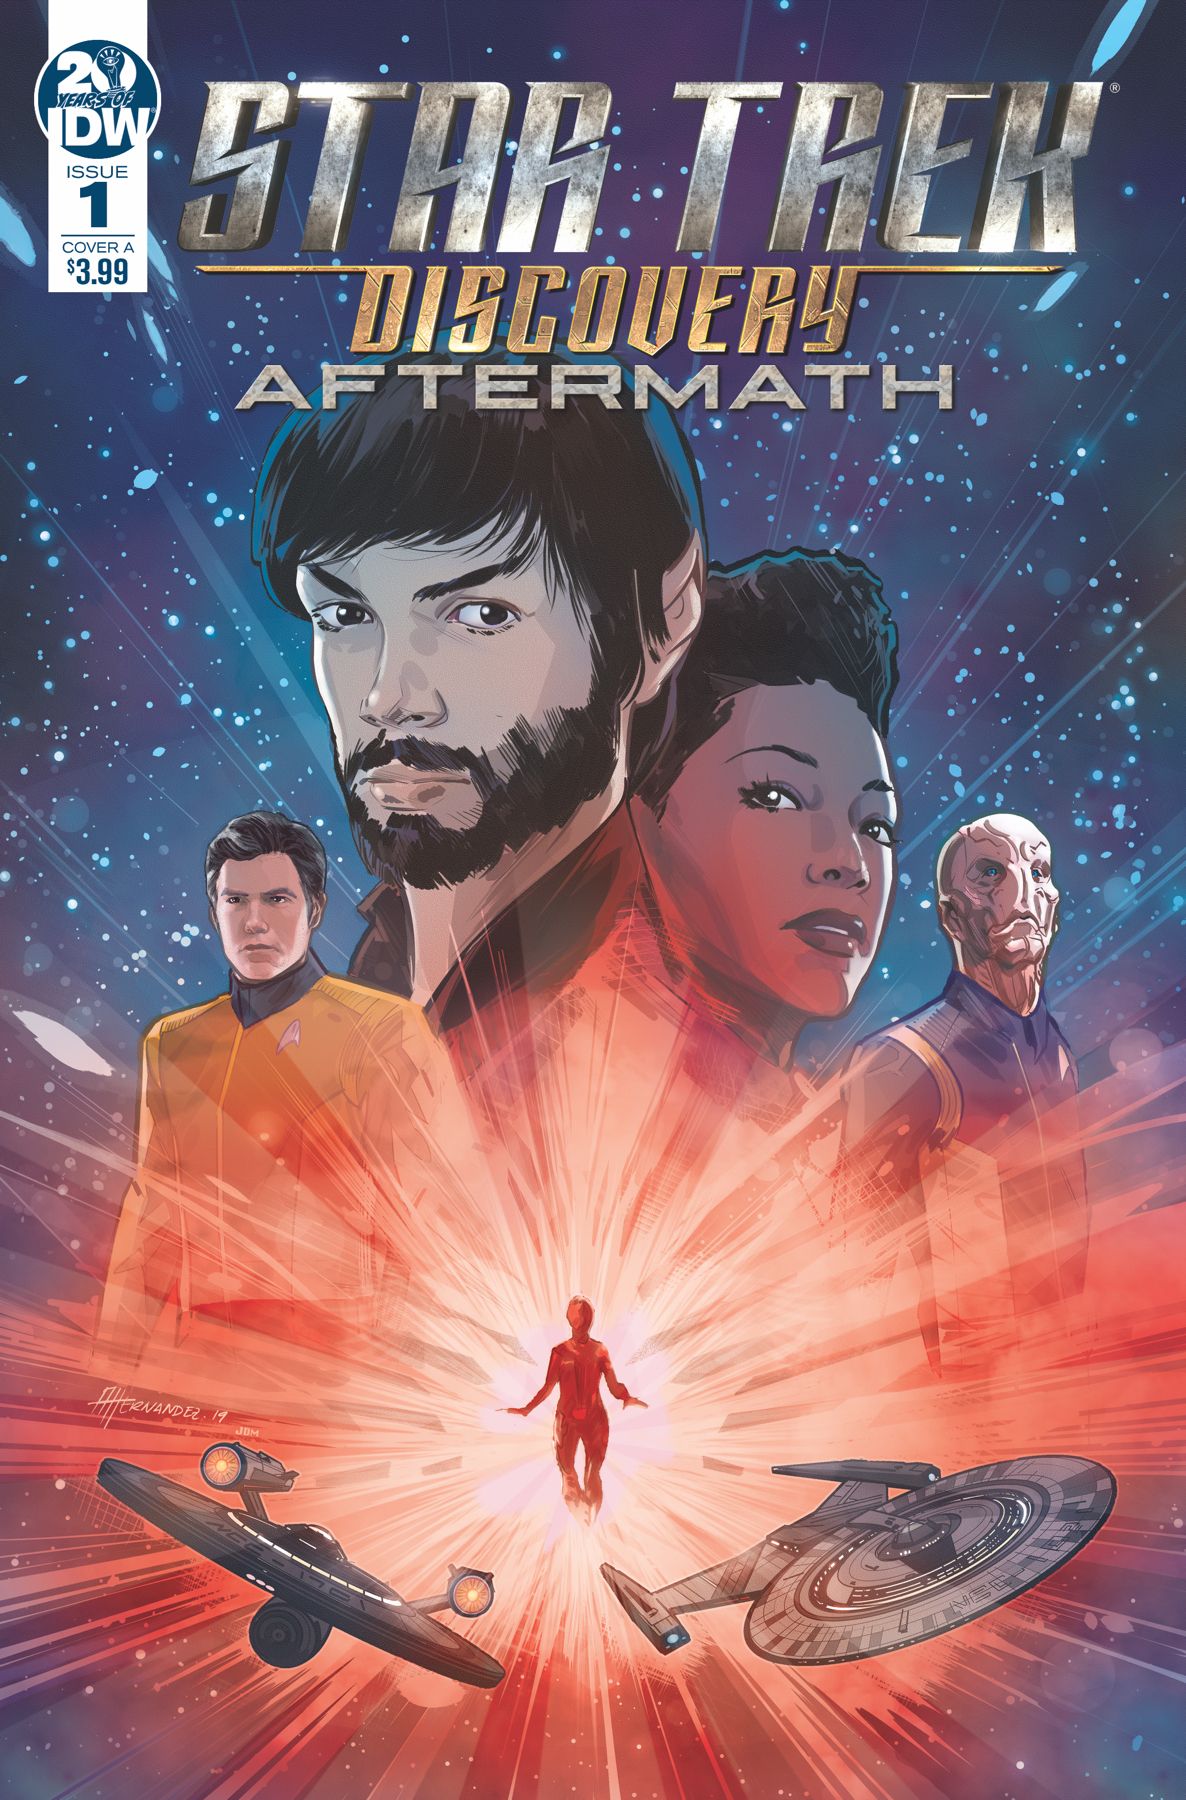 Star Trek: Discovery - Aftermath #1 Comic